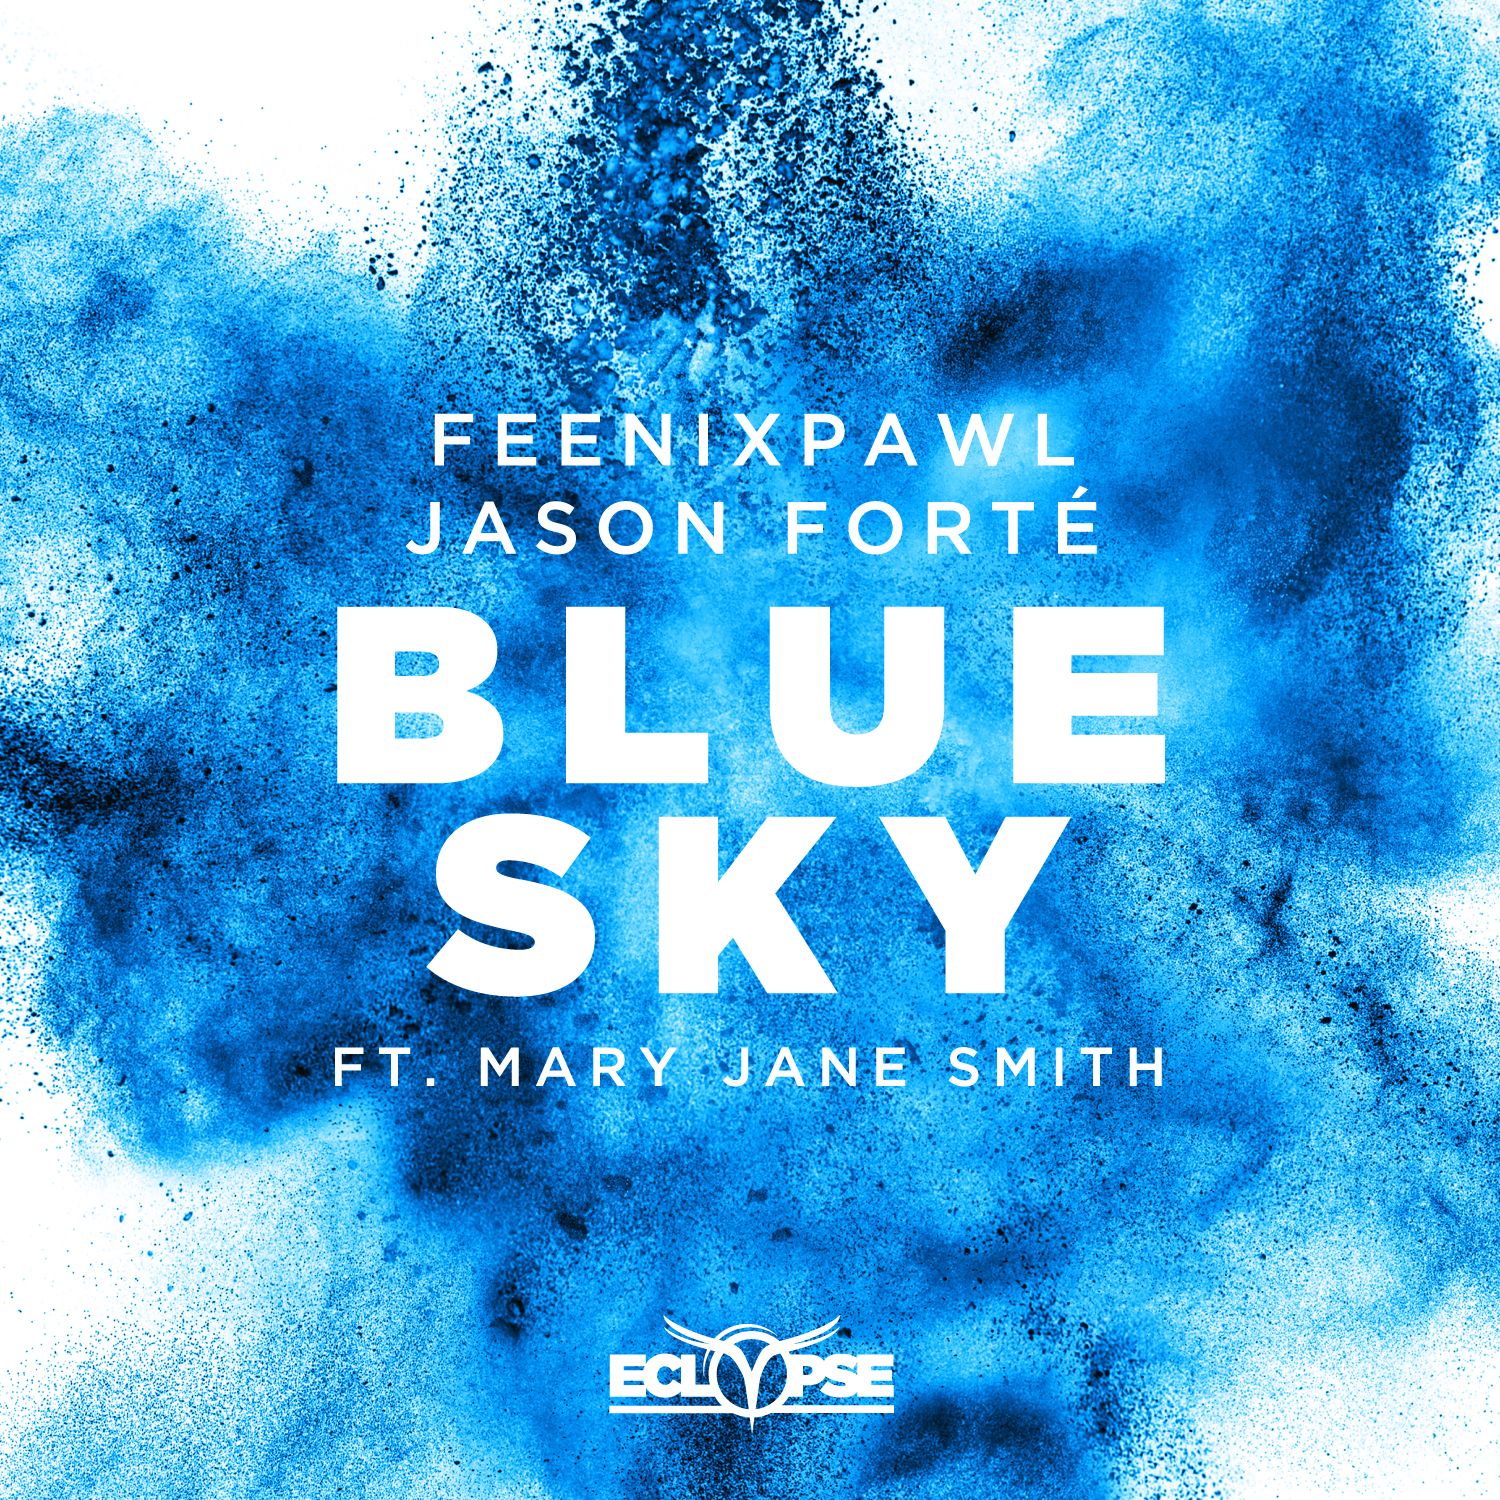 Blue Sky (Extended Mix)